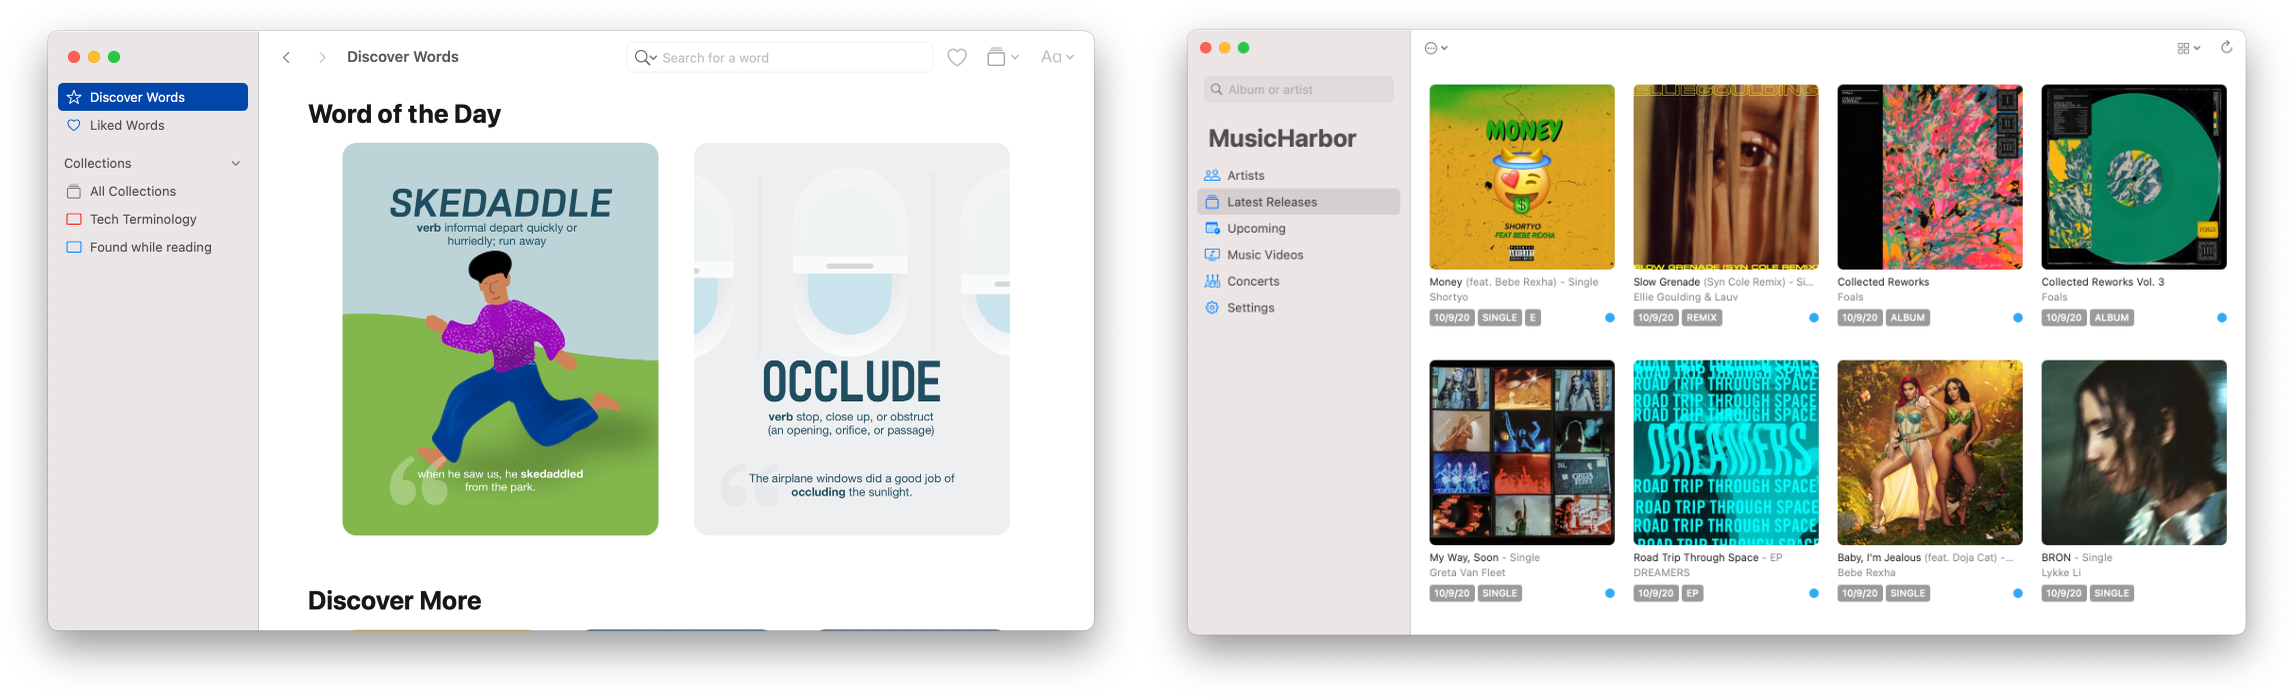 LookUp (left) and MusicHarbor (right) are excellent examples of upcoming third-party apps that have evolved from tab bar-based iOS apps to use the Mac's sidebar.